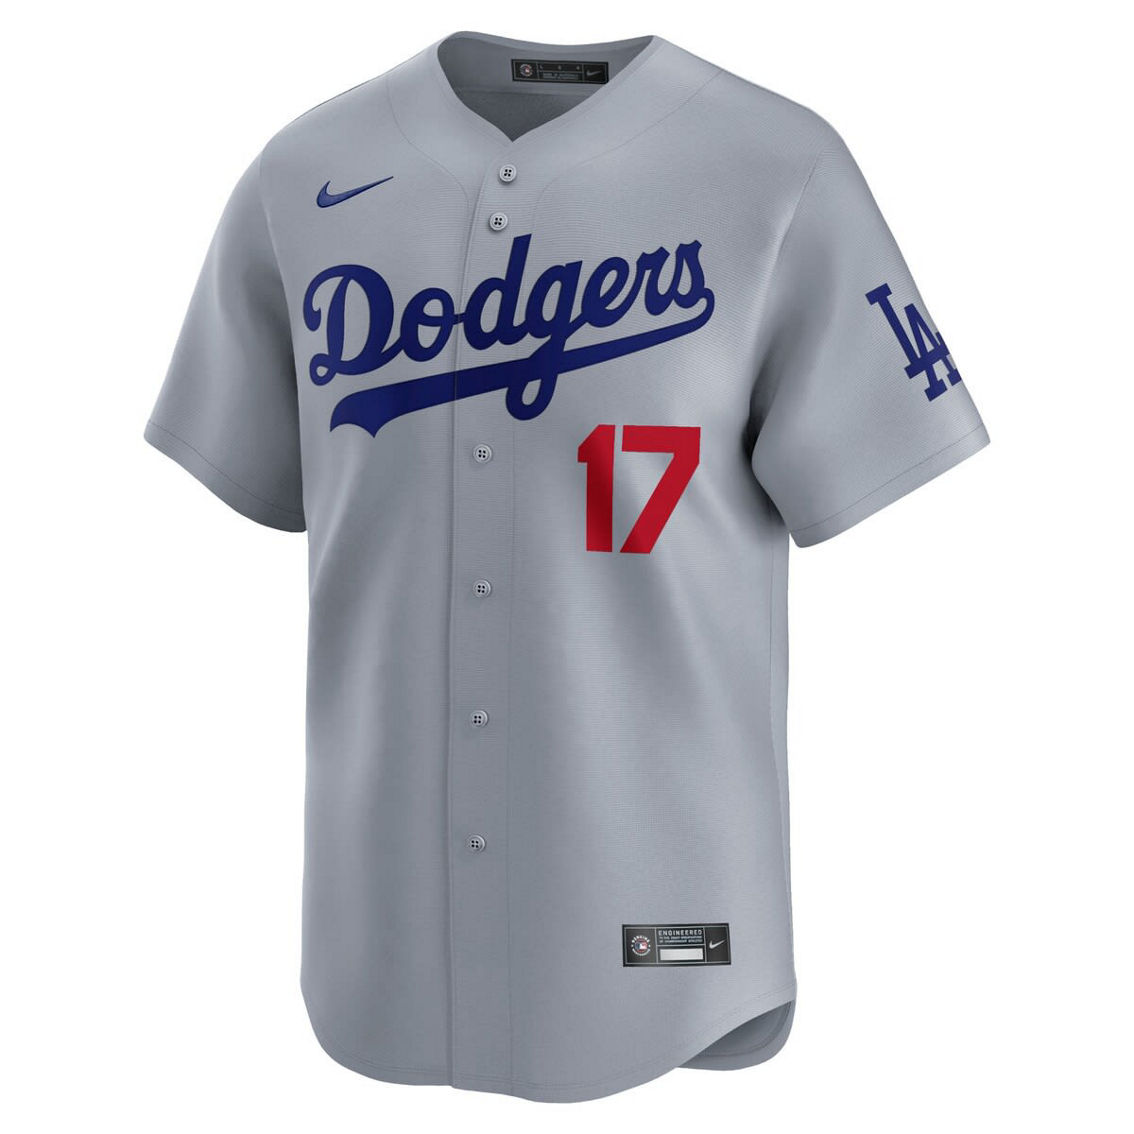 Nike Men's Shohei Ohtani Gray Los Angeles Dodgers Away Limited Player Jersey - Image 3 of 4